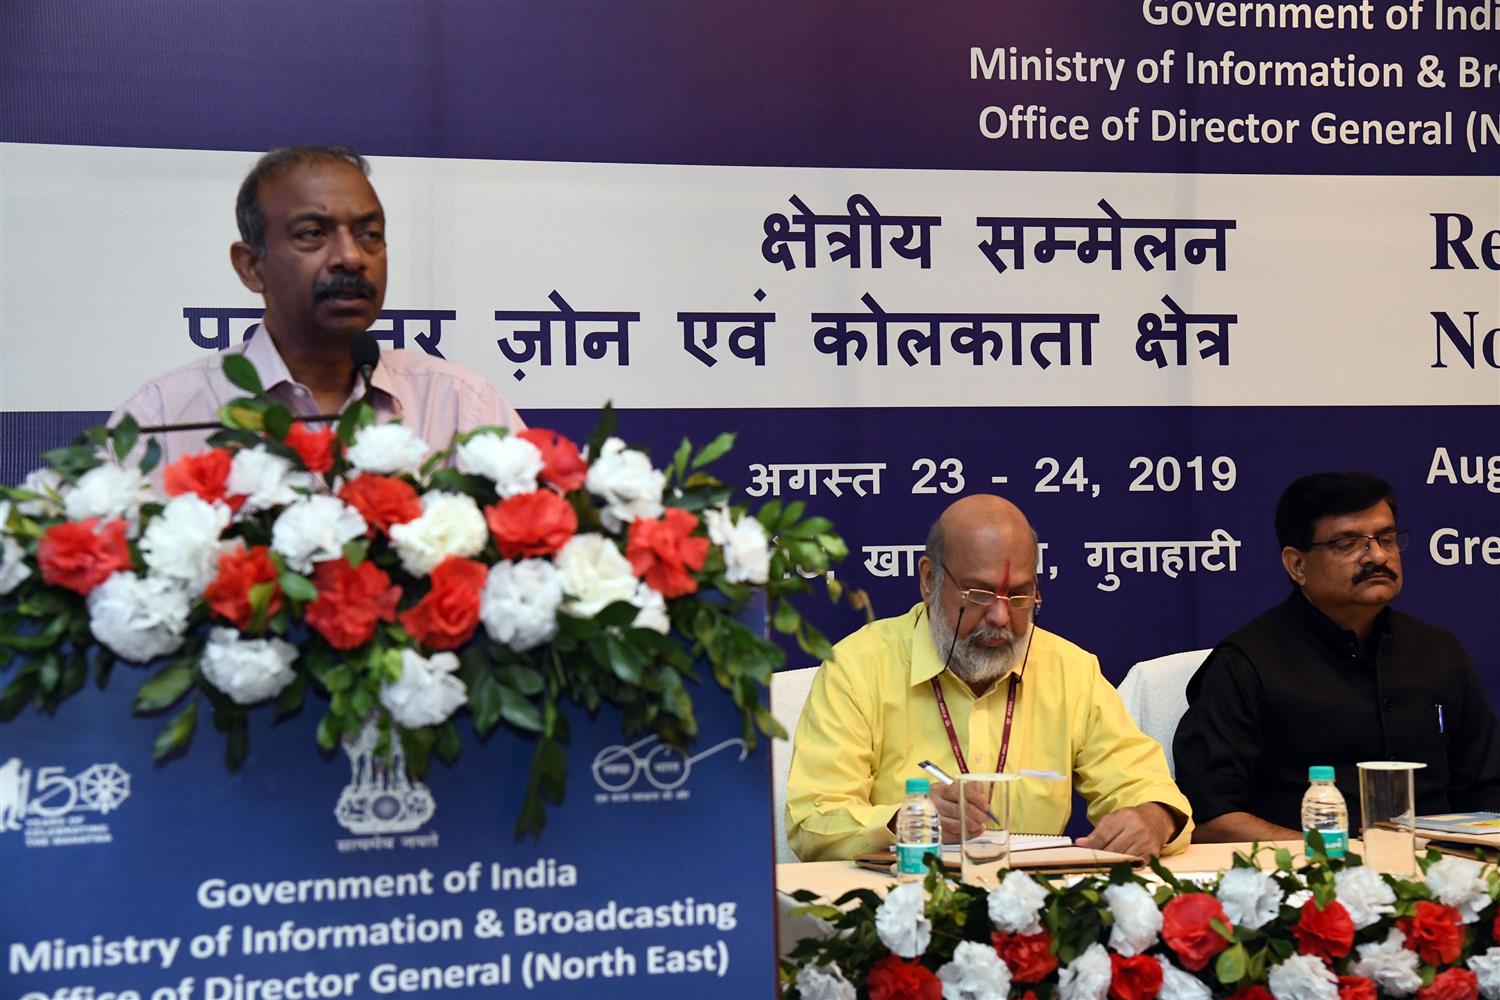 Shri. Amit Khare, Secretary Ministry of I& B  delivering his speech at the  Regional Conference of NE Zone &  Kolkata Region  at Guwahati  on 24th August 2019, Shri. Vikram Sahay Joint Secretary, Ministry of I& B ,Shri. L.R Vishwanath, Director General North East Zone and Shri. Satyendra Prakash, Director General, BOC, New Delhi are also seen in the picture.